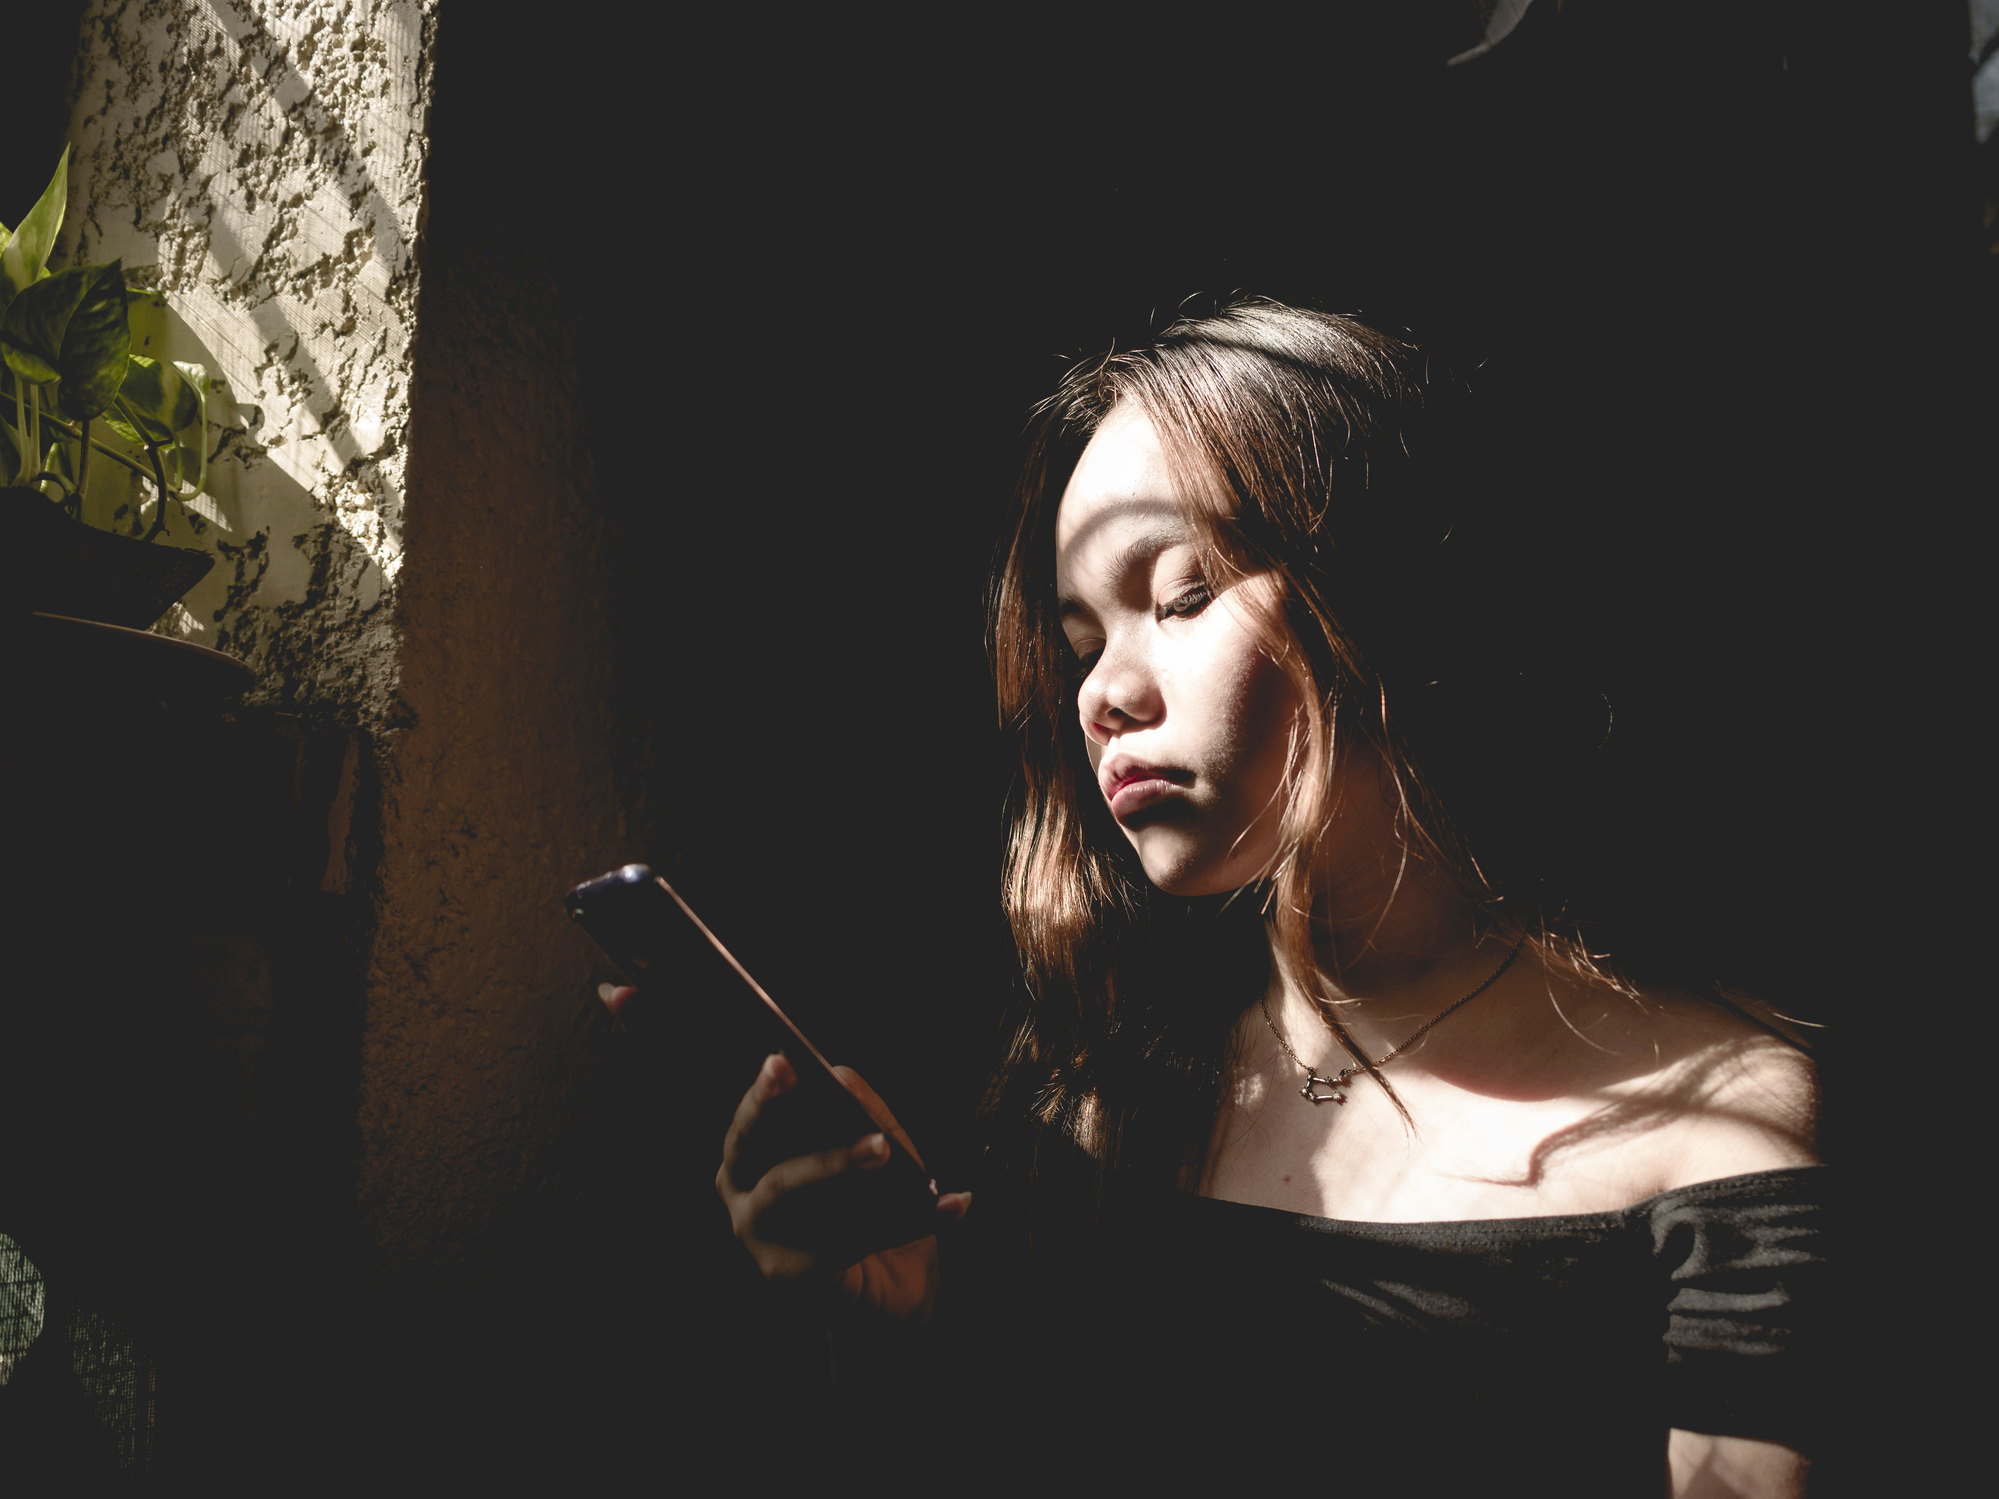 Woman looking at smartphone and her expression is contemplative